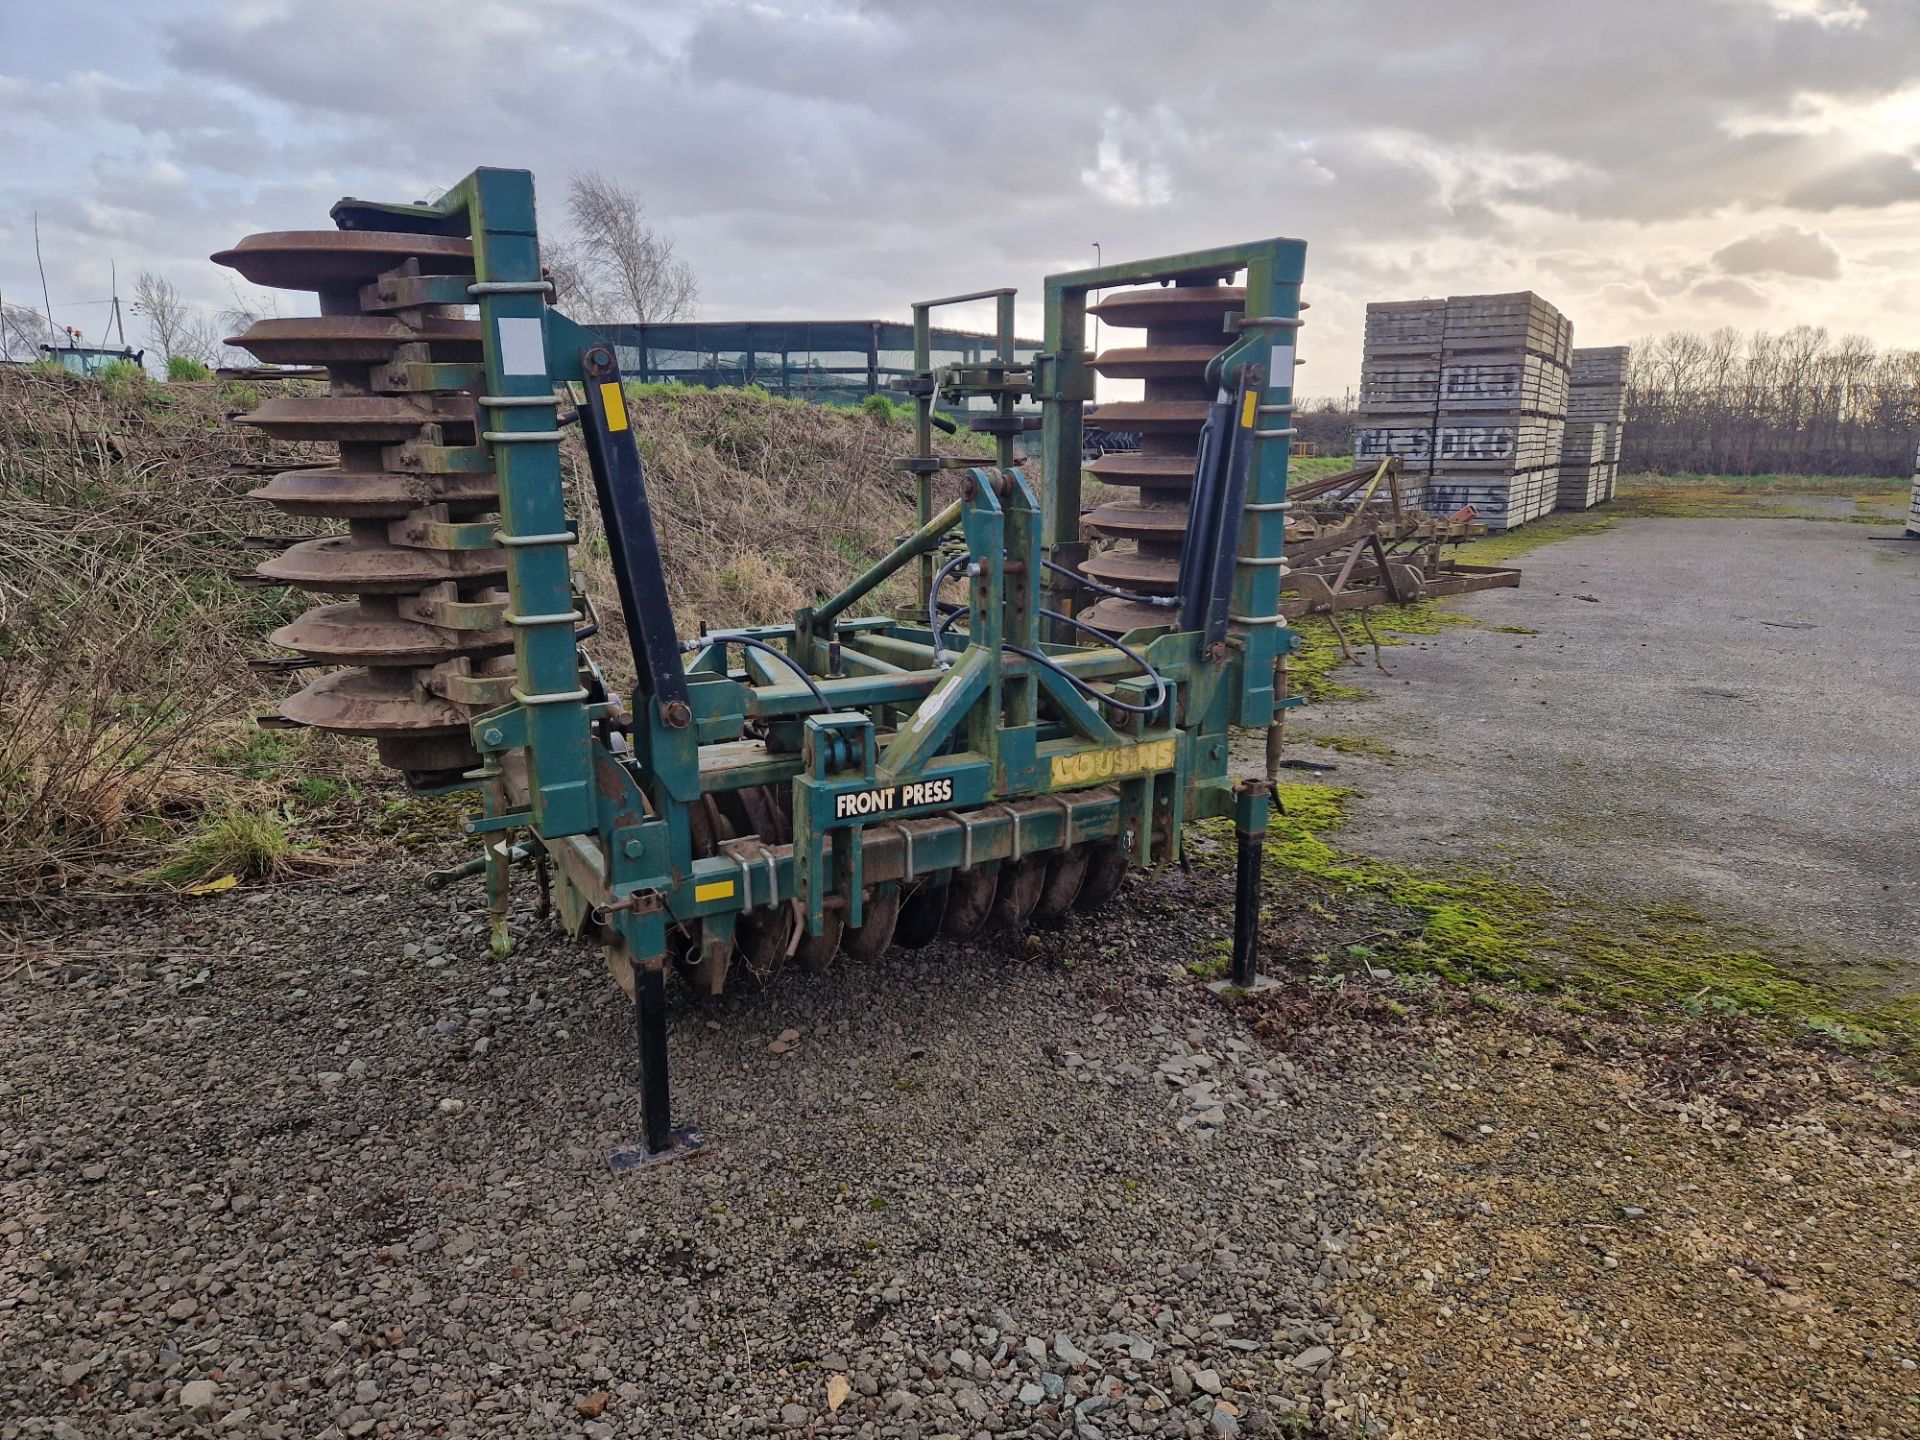 (05) Cousins 4m front press with DD raiser rings, hydraulic folding, spring tines